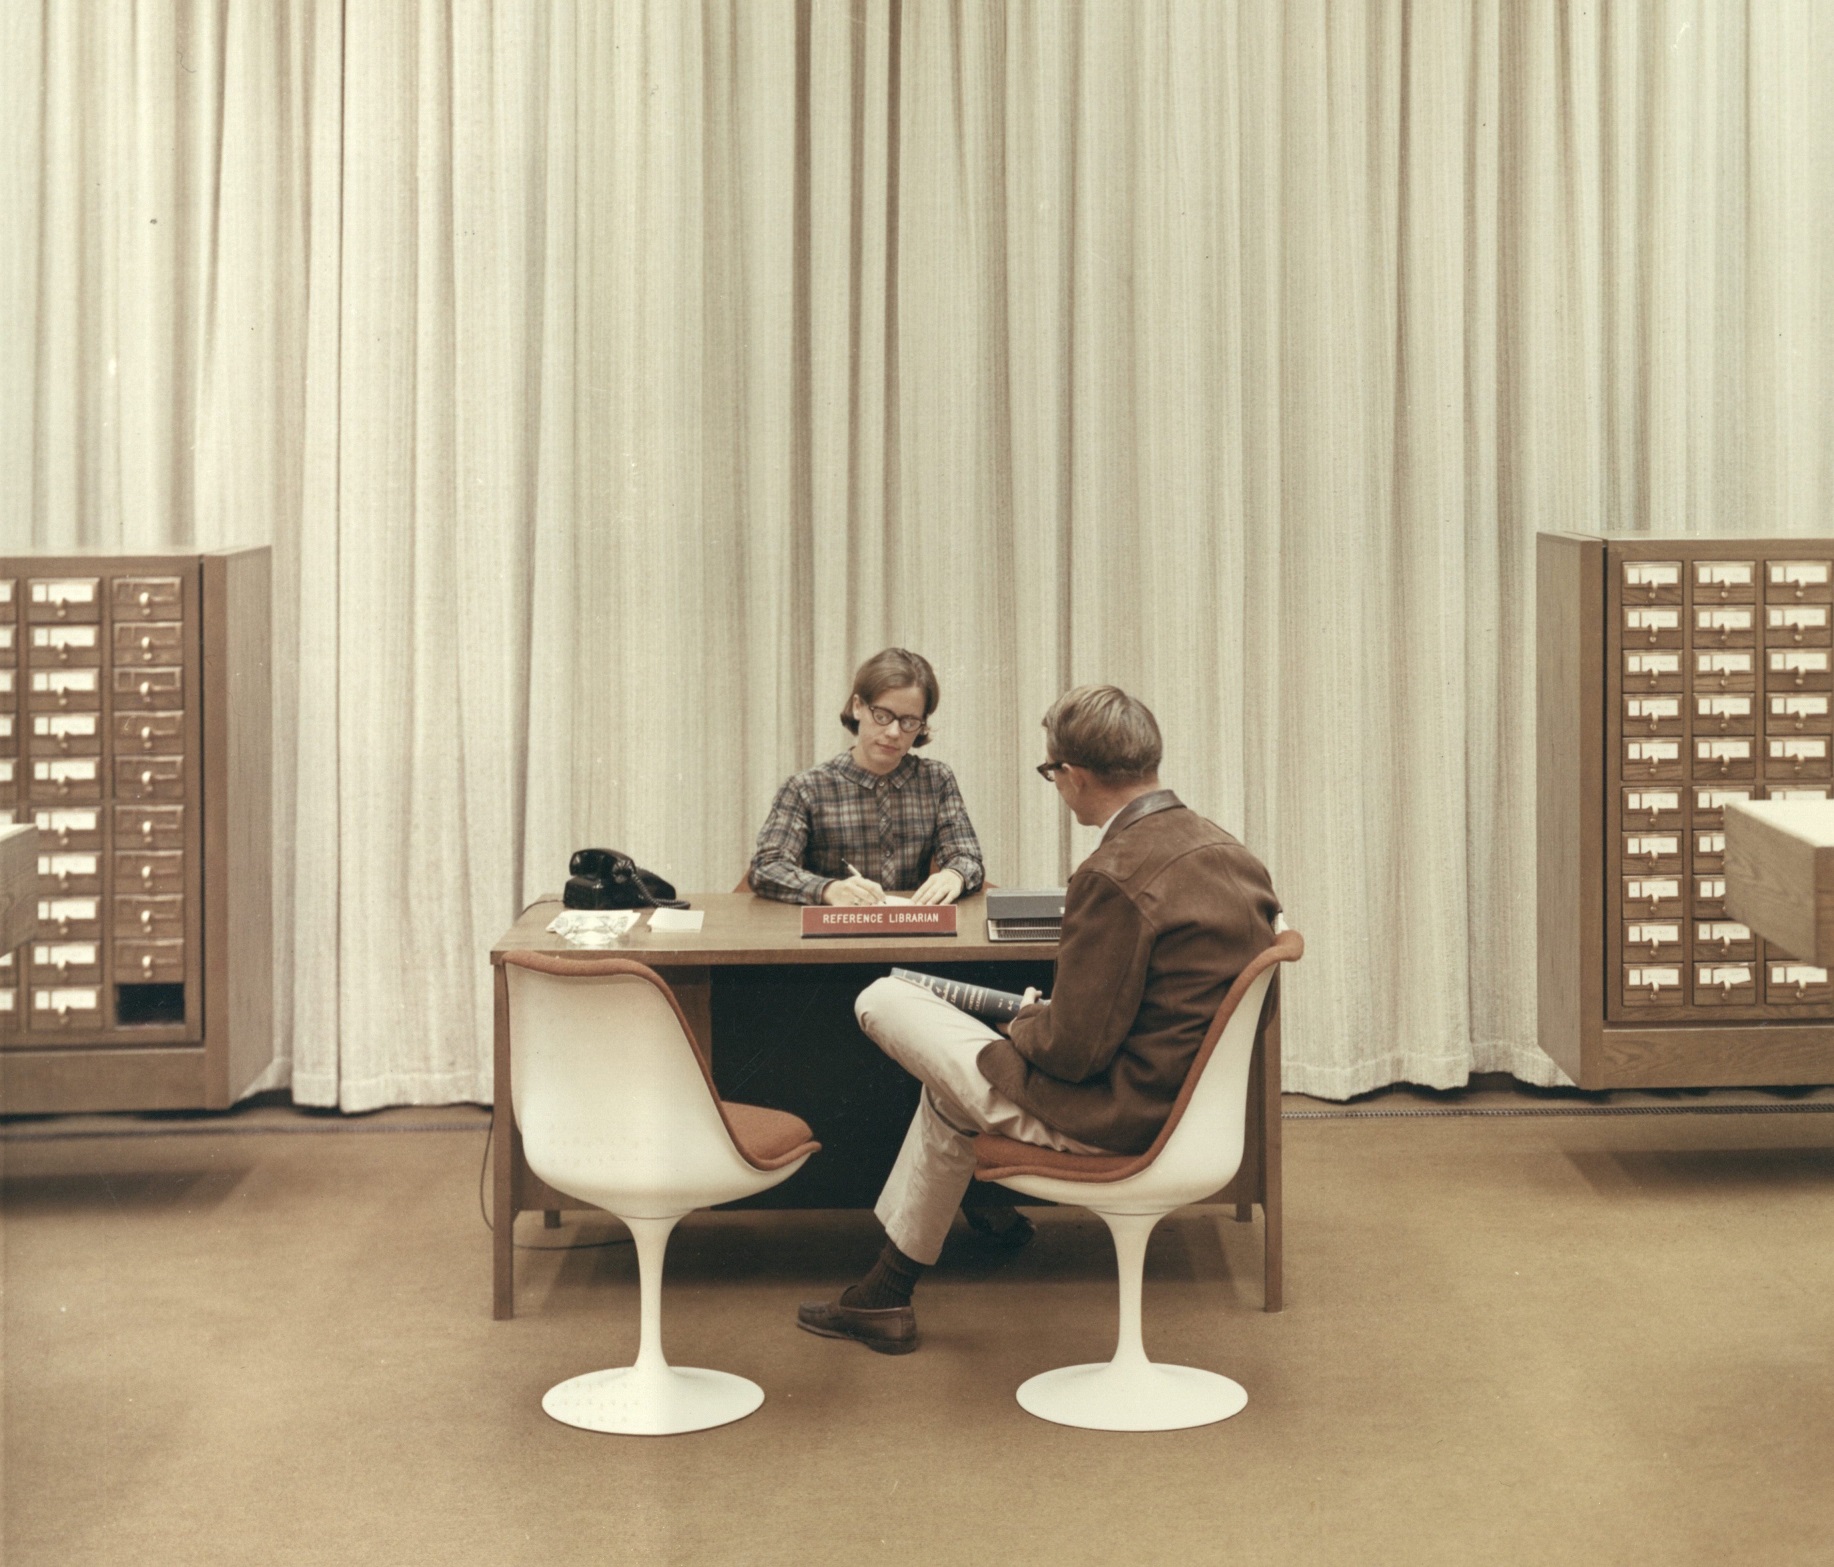 Research help at Countway Library, circa 1970s